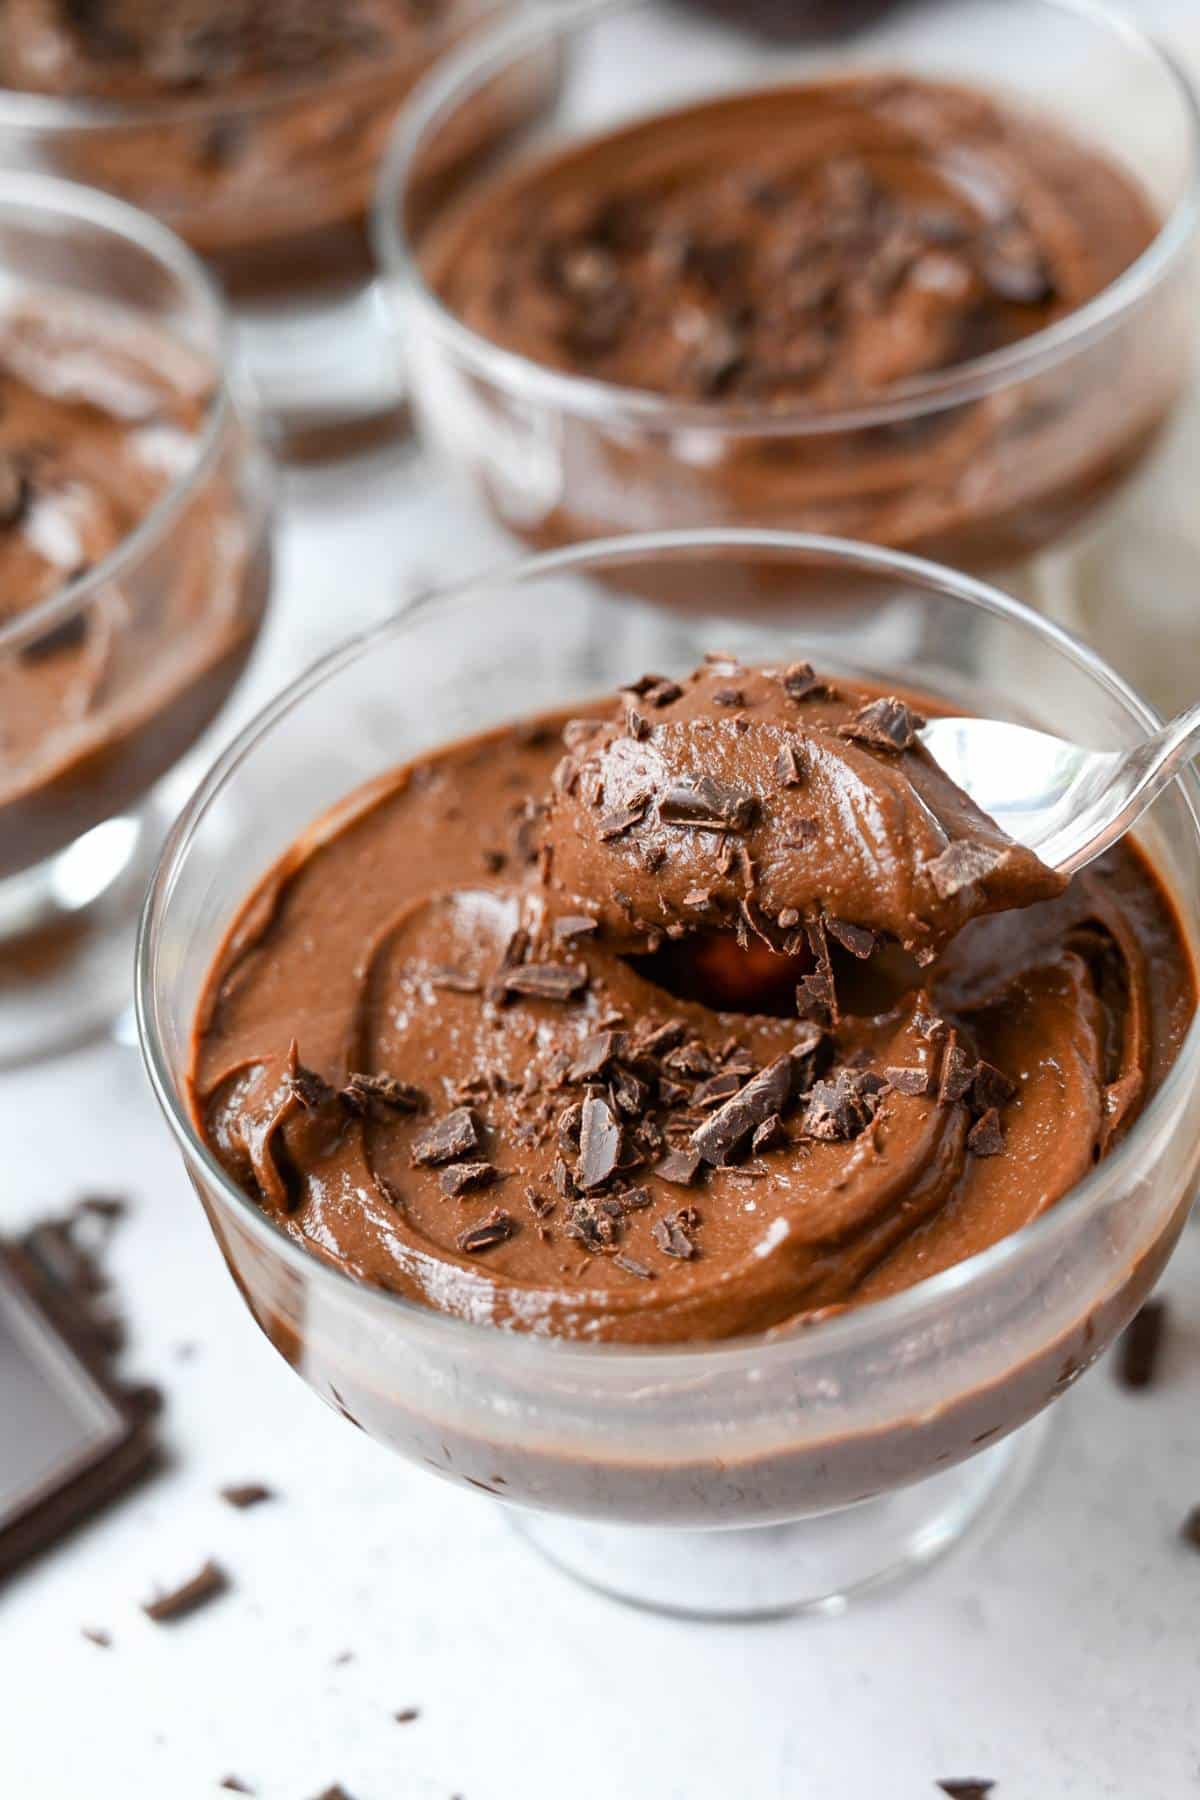 photo of clear dessert dishes with chocolate pudding with dark chocolate shavings